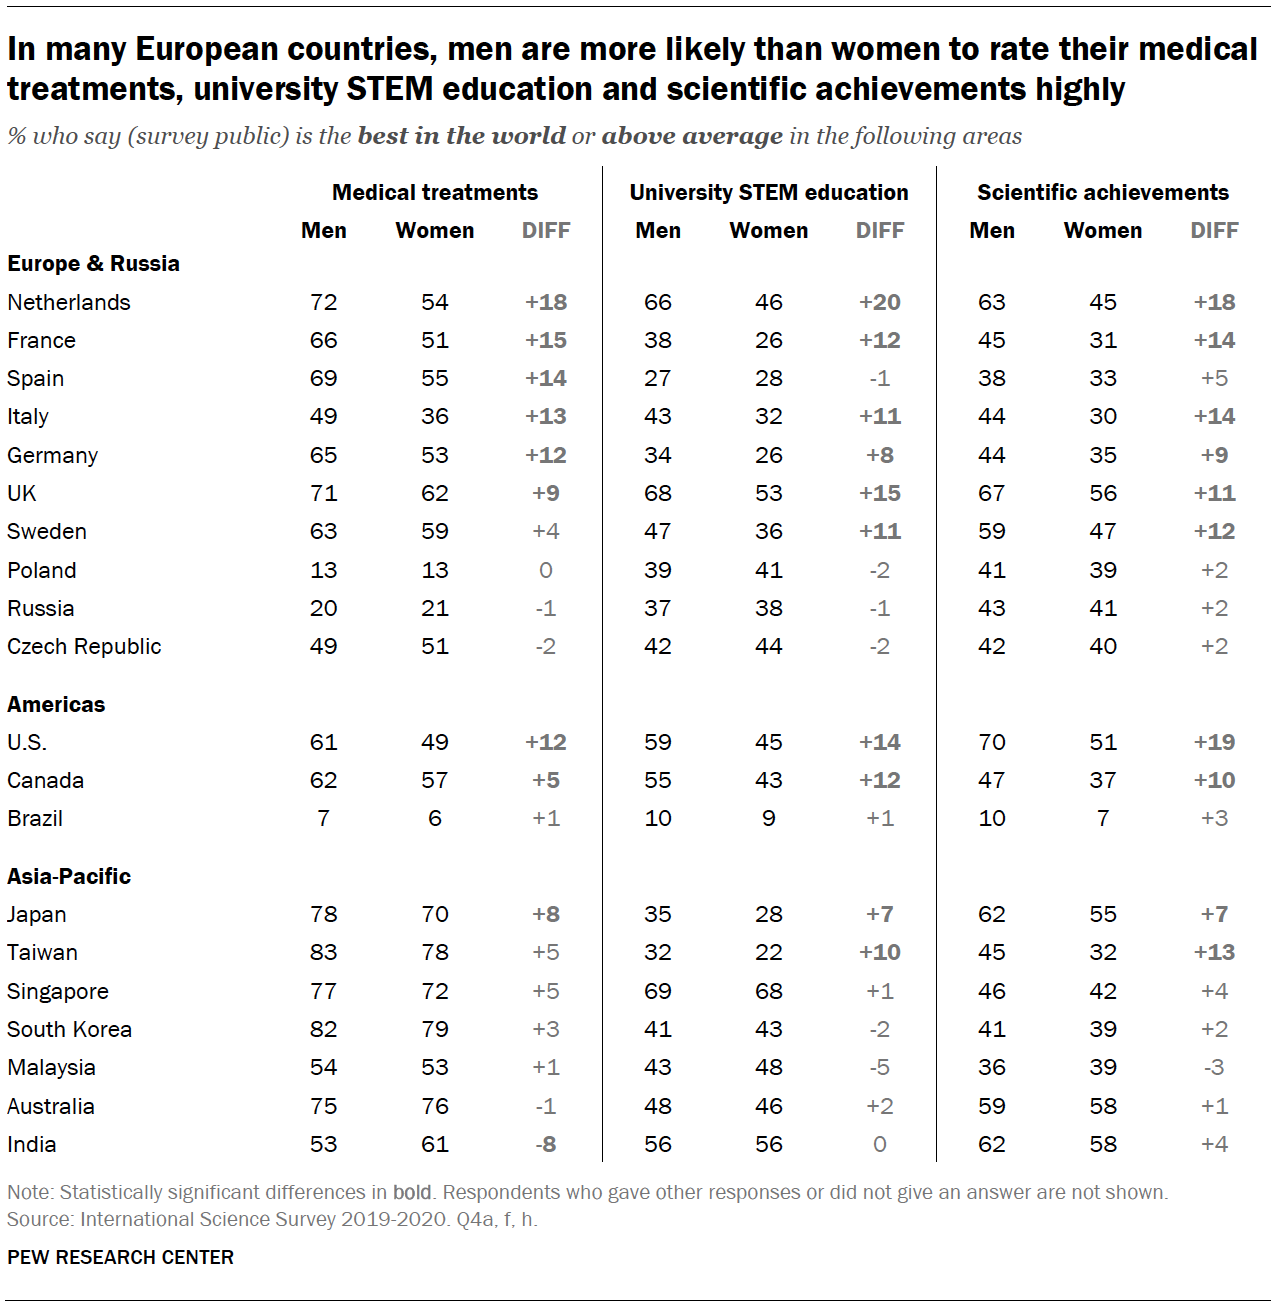 Chart shows in many European countries, men are more likely than women to rate their medical treatments, university STEM education and scientific achievements highly